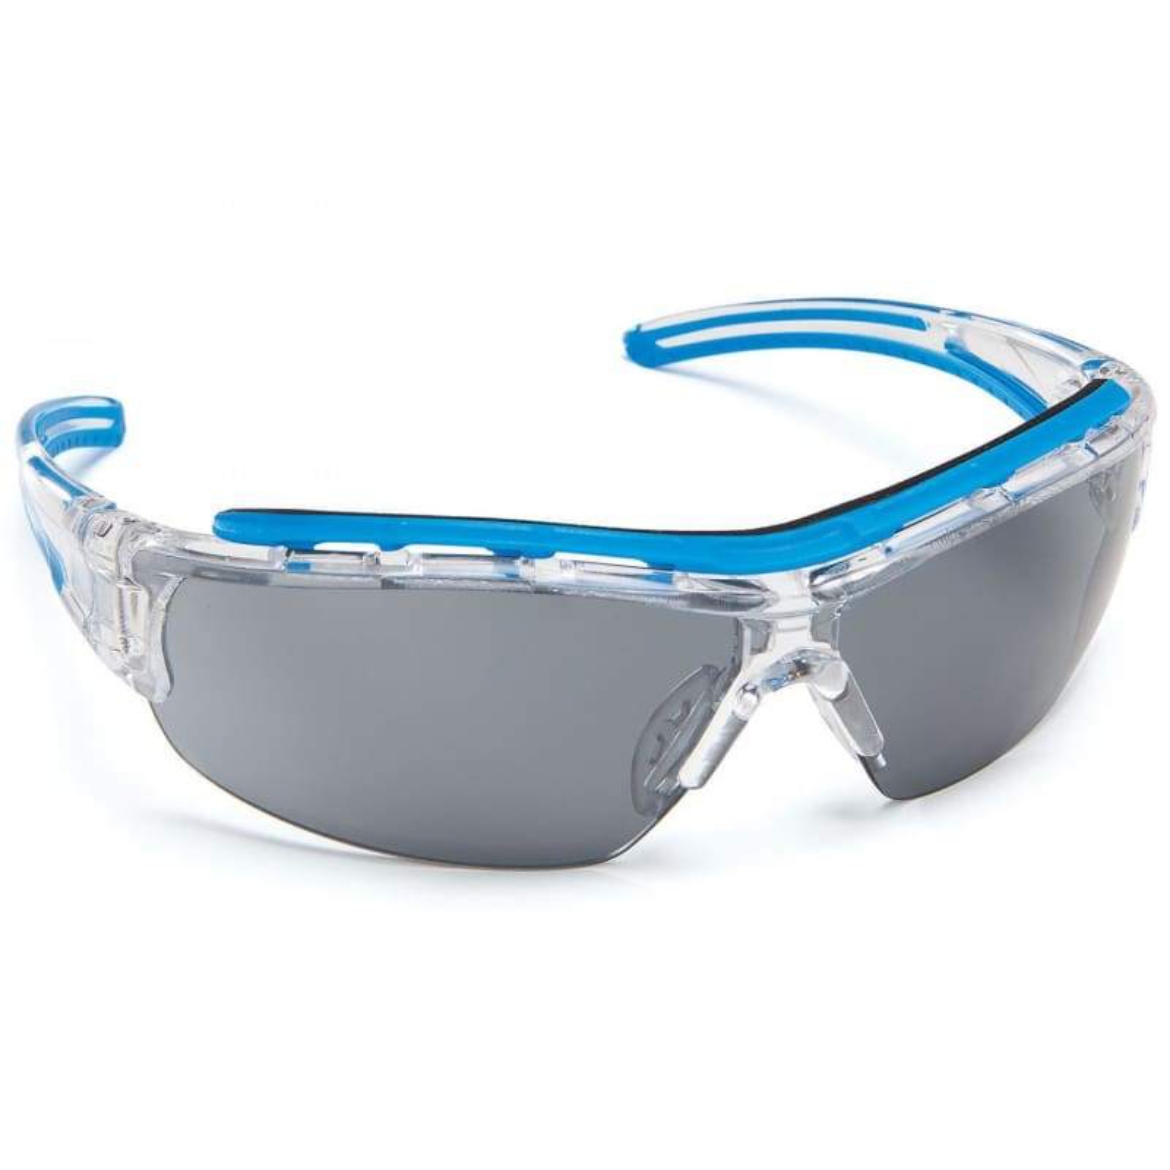 Picture of Force360 Shield Smoke Lens Safety Glasses